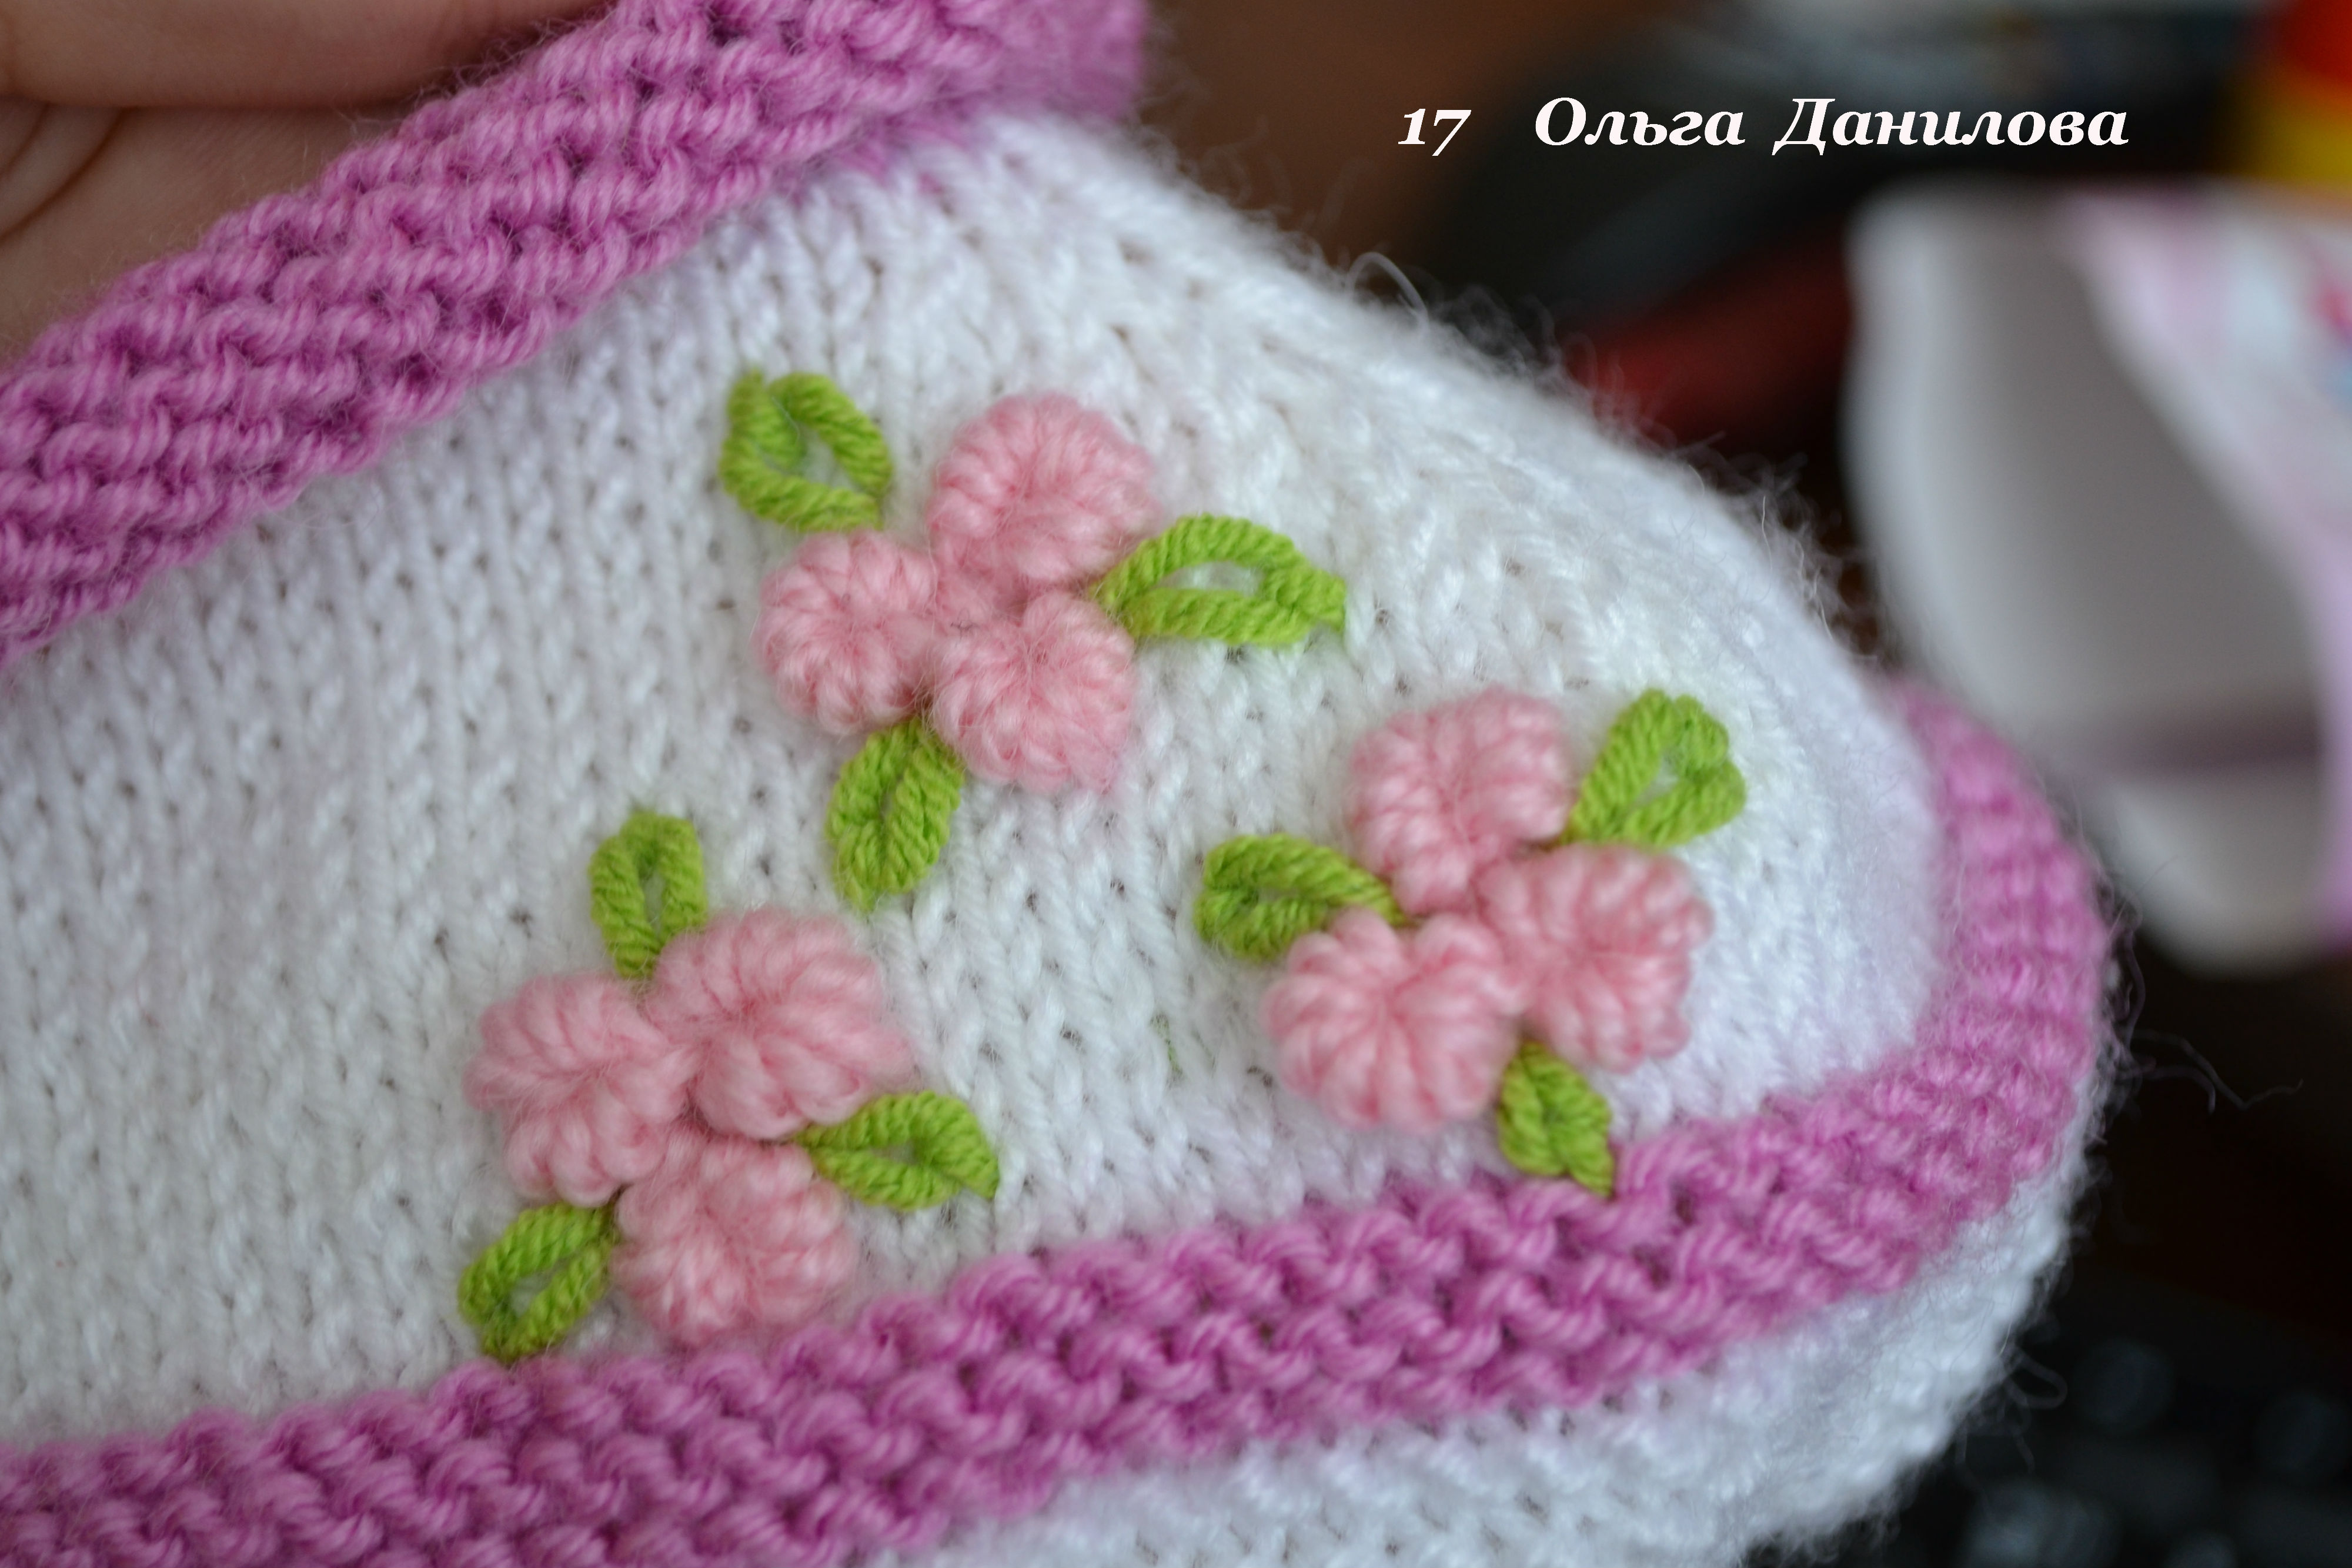 How-to-Make-Pretty-Knitted-Baby-Booties-19.jpg